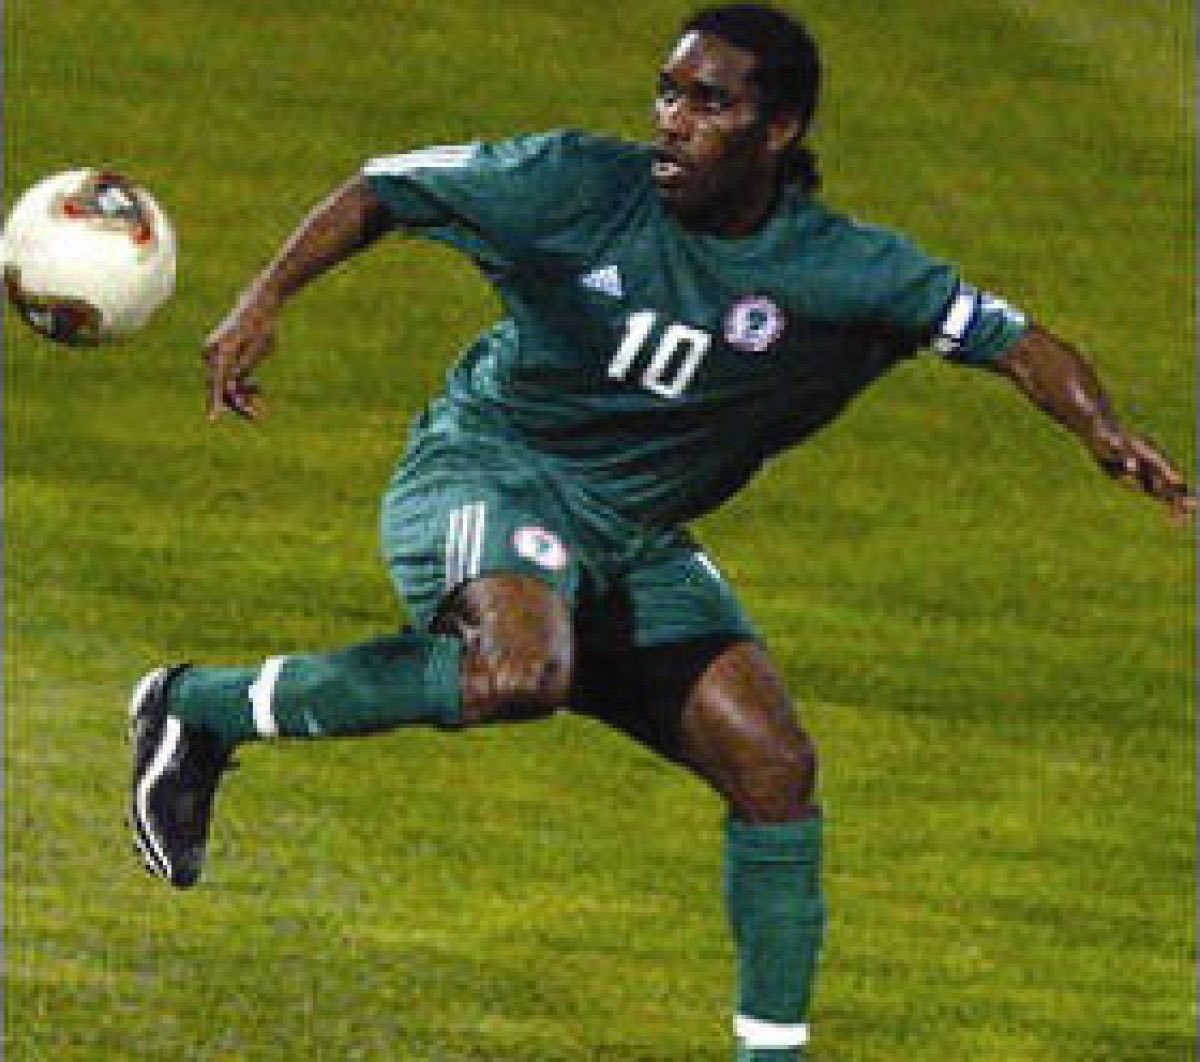 Okocha debuted for Nigeria in the 2–1 1994 World Cup Qualifier away loss to Ivory Coast in May 1993. Won the Nations Cup in 1994, Played at three World Cups, Olympic gold medal at Atlanta, BBC African Best Player 2003, 2004, 2nd Best CAF African Player